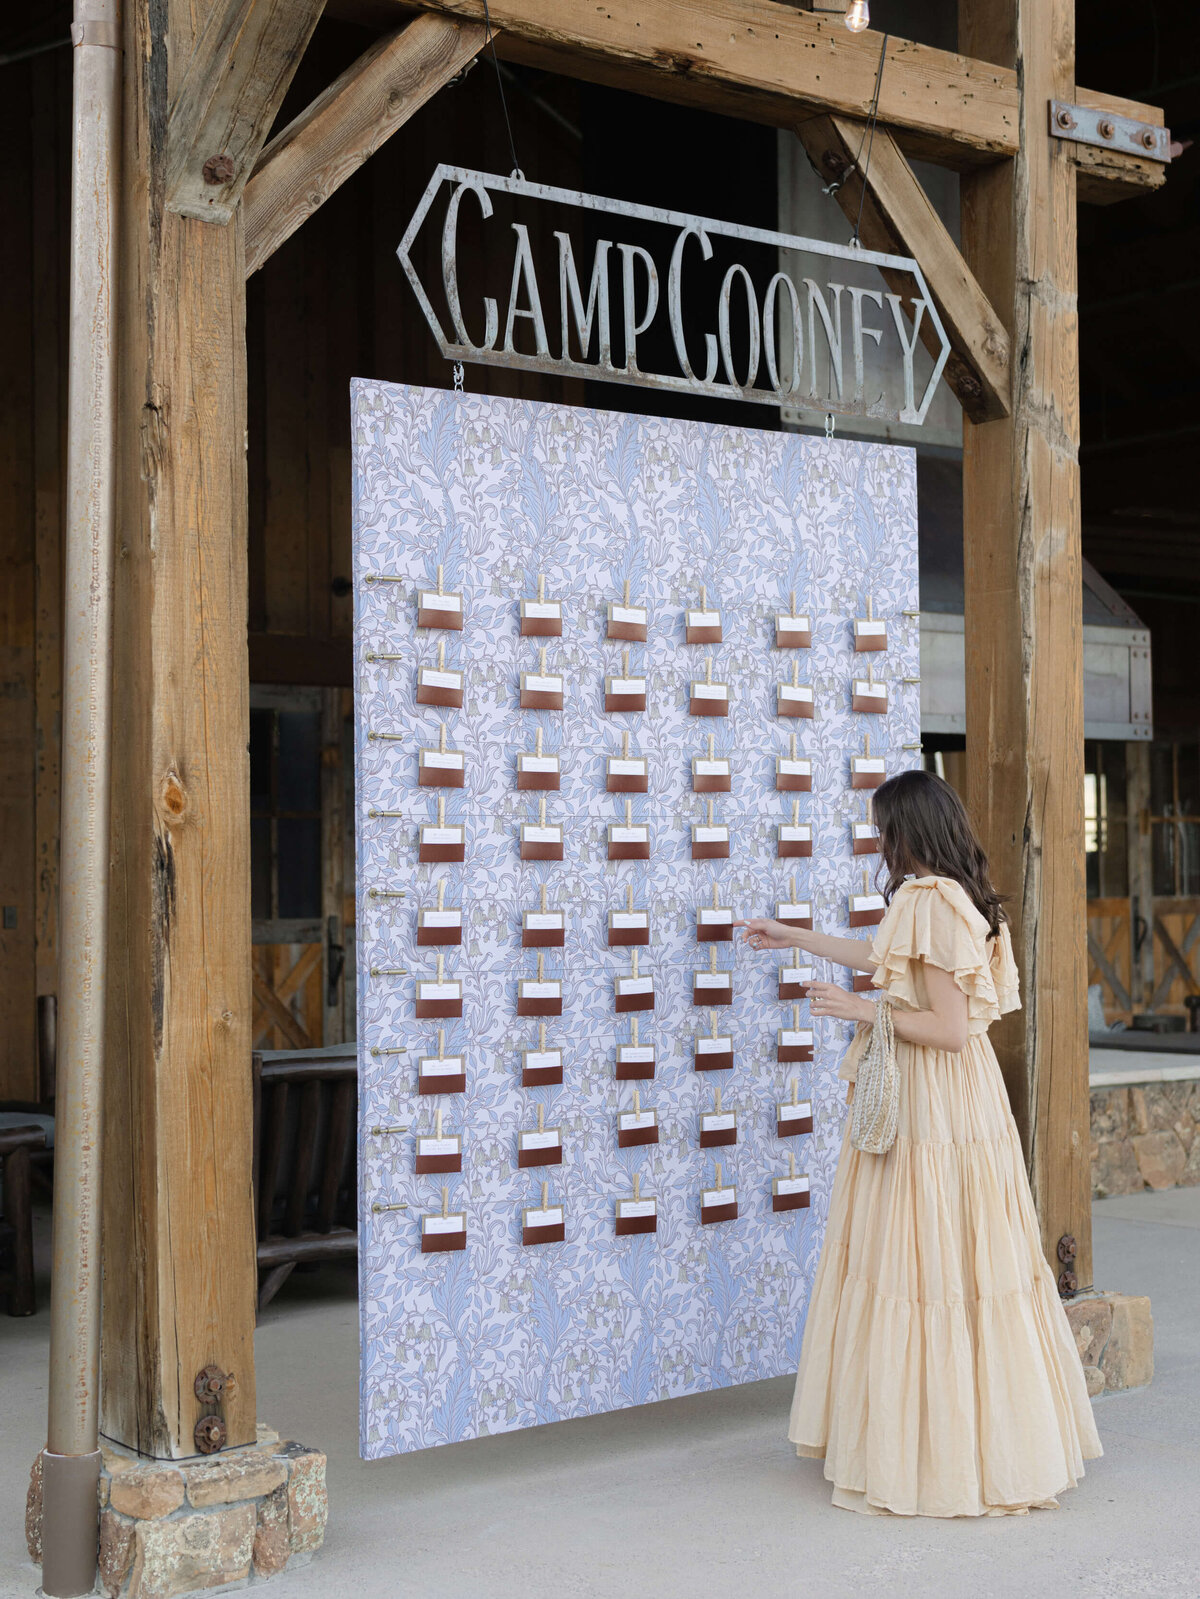 53-KT-Merry-Photography-Western-Wedding-Camp-Cooney-Sign